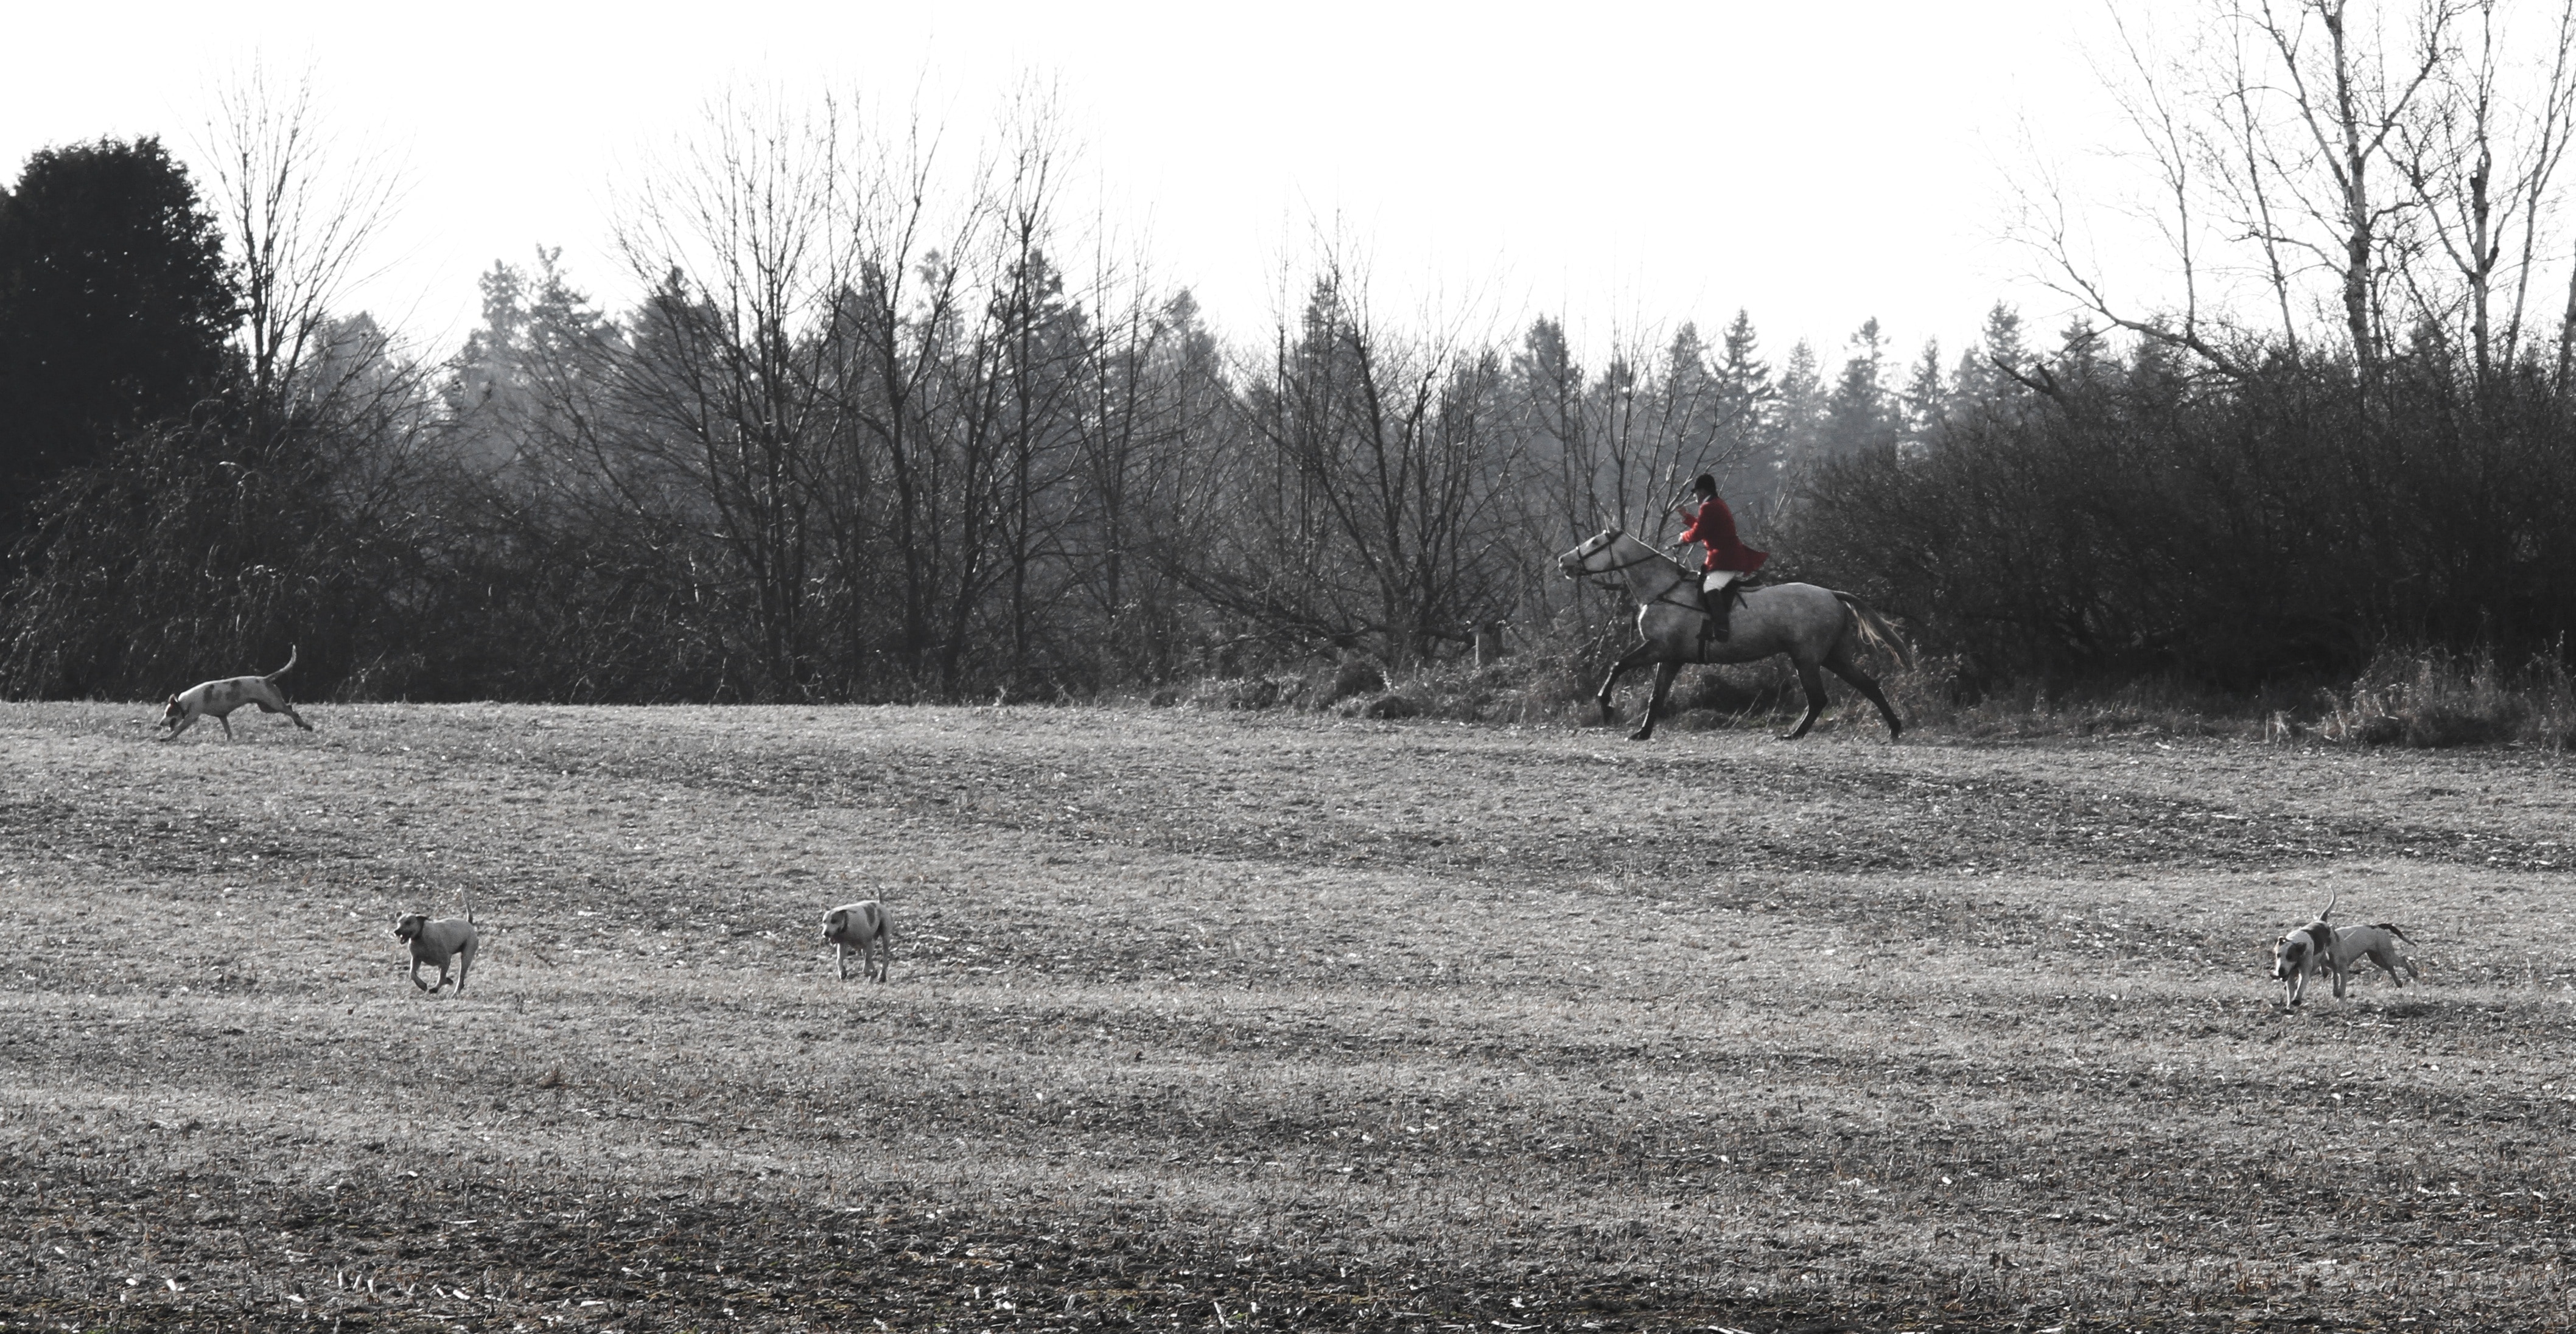 man riding on horse beside forests